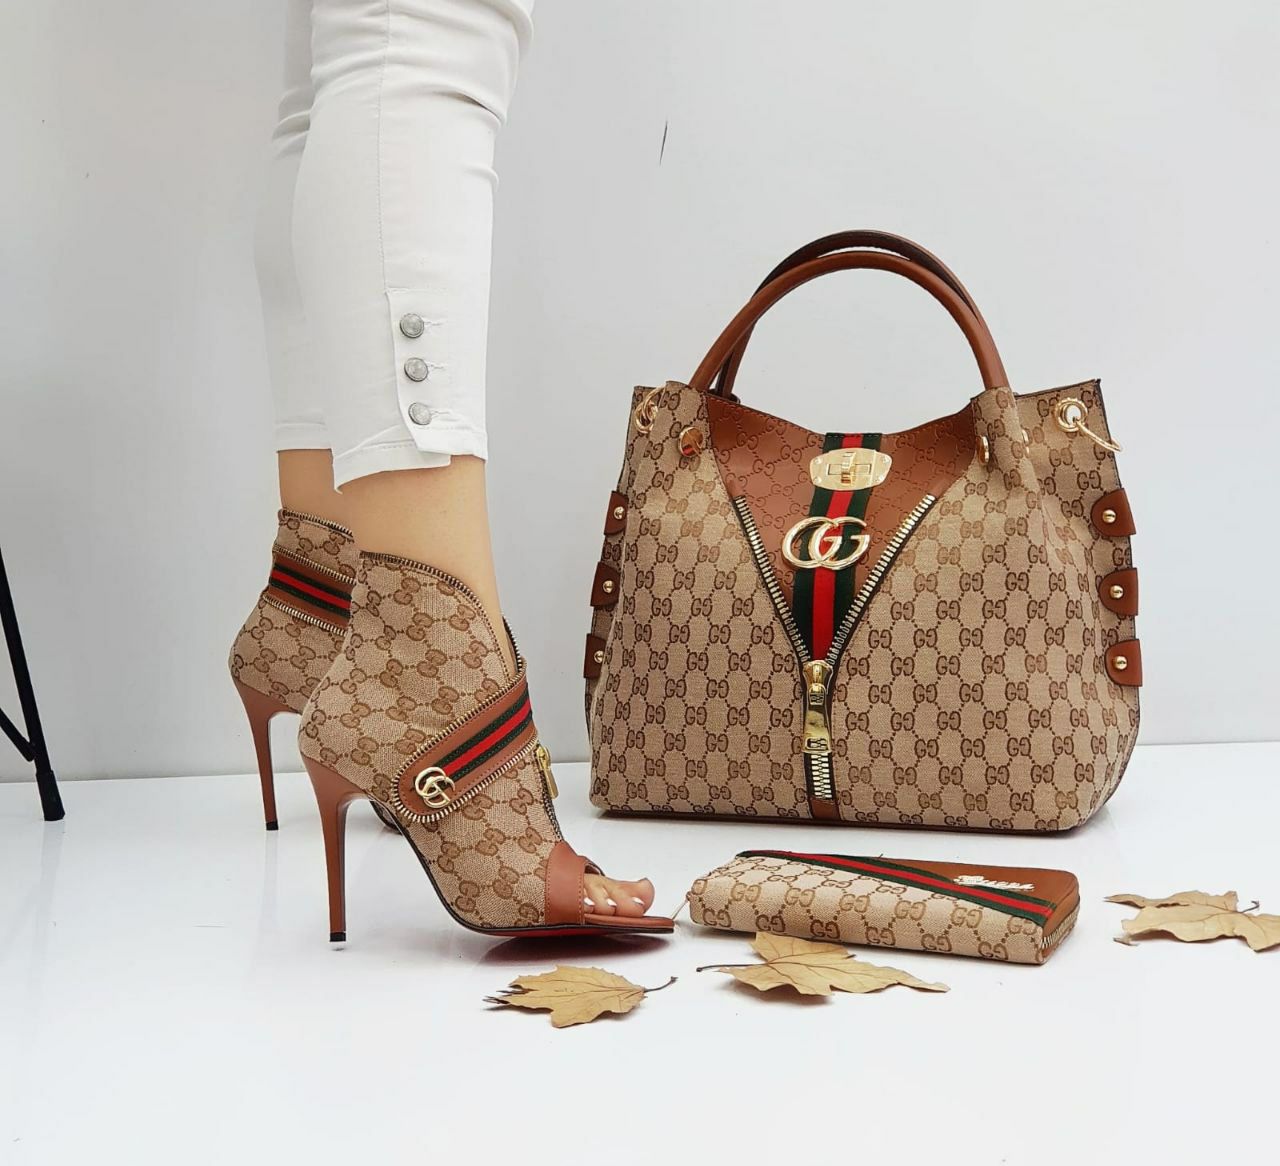 Gucci boot tiptoe heels and ophidia tote bag